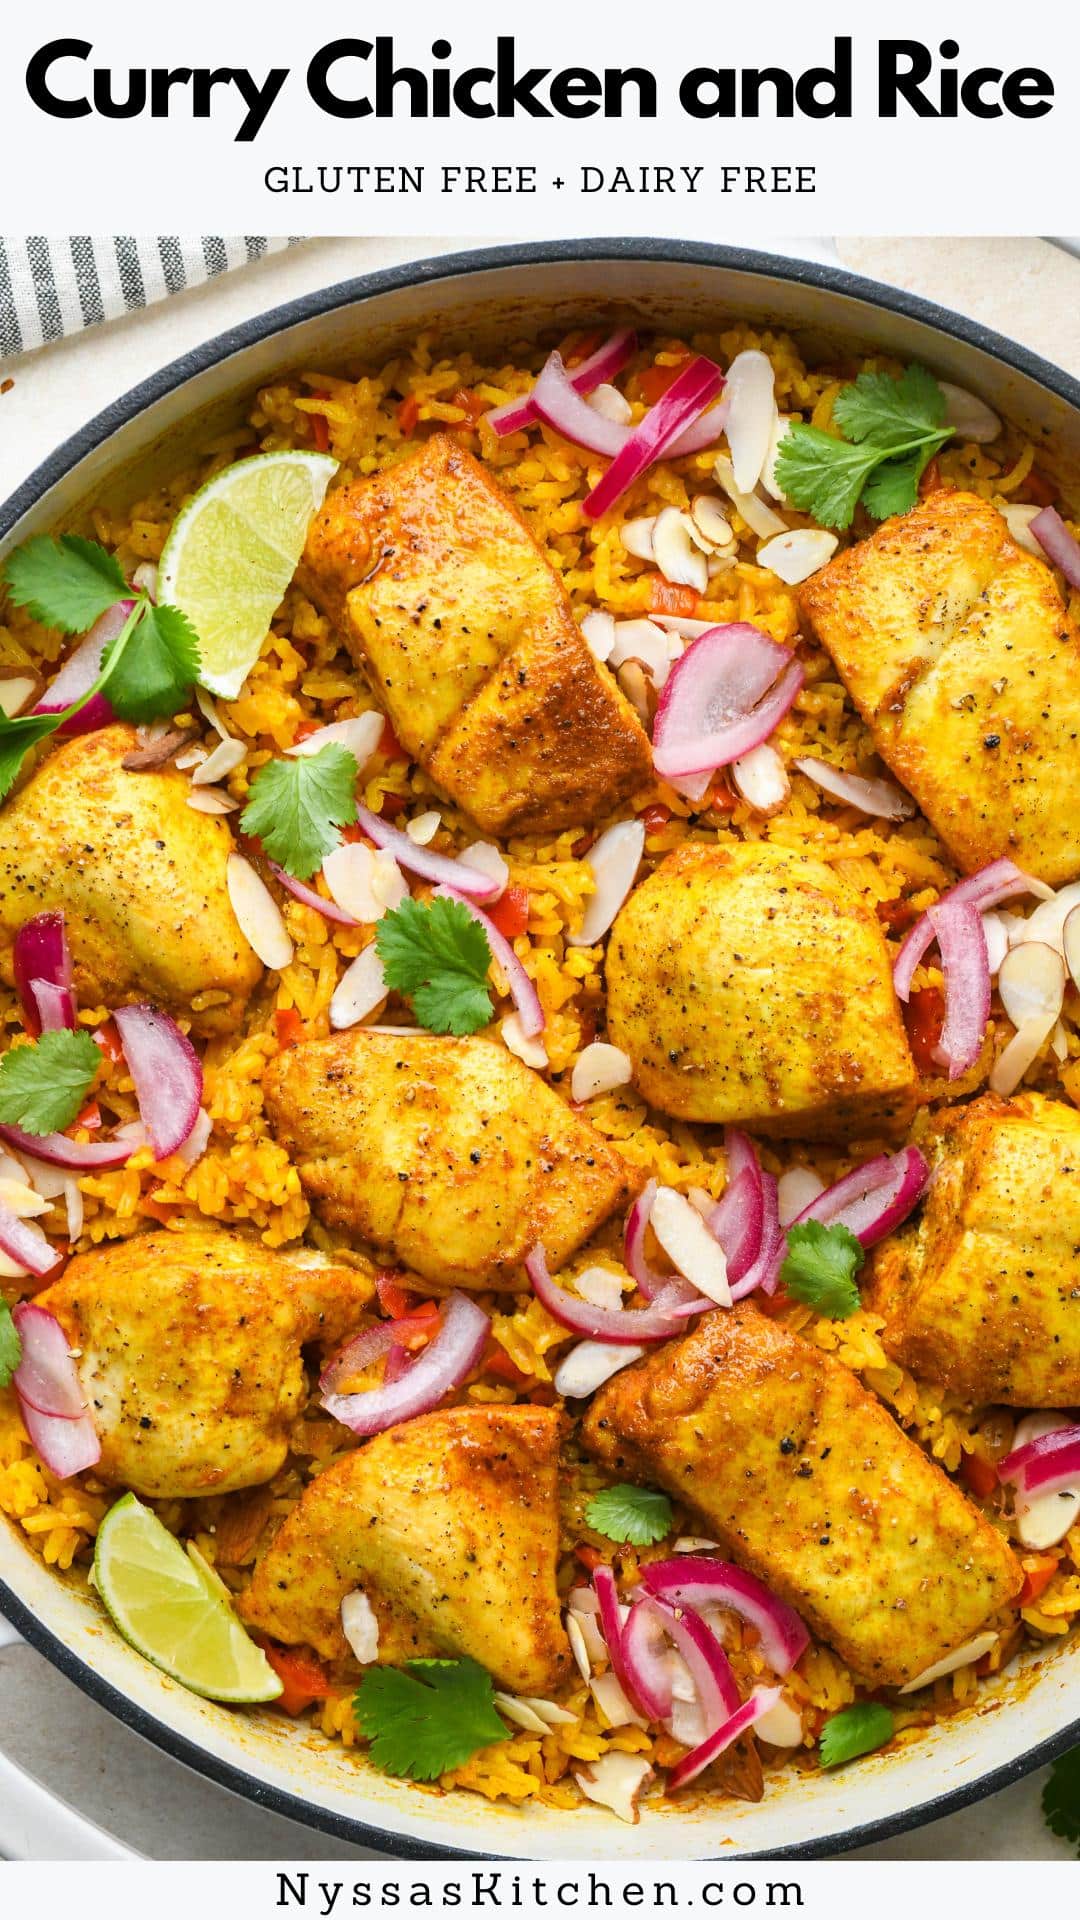 This curry chicken and rice is a flavorful and healthy meal prepared in just one pot and baked in the oven! Made with lean chicken breasts, bell peppers, onions, garlic, fluffy rice, and plenty of flavorful spices, it is satisfying and delicious (& made without coconut milk). It comes together around one hour with prep time included and reheats well if you have leftovers. Take advantage of the colorful and punchy garnishes to bring out all the flavorful nuances of the dish!